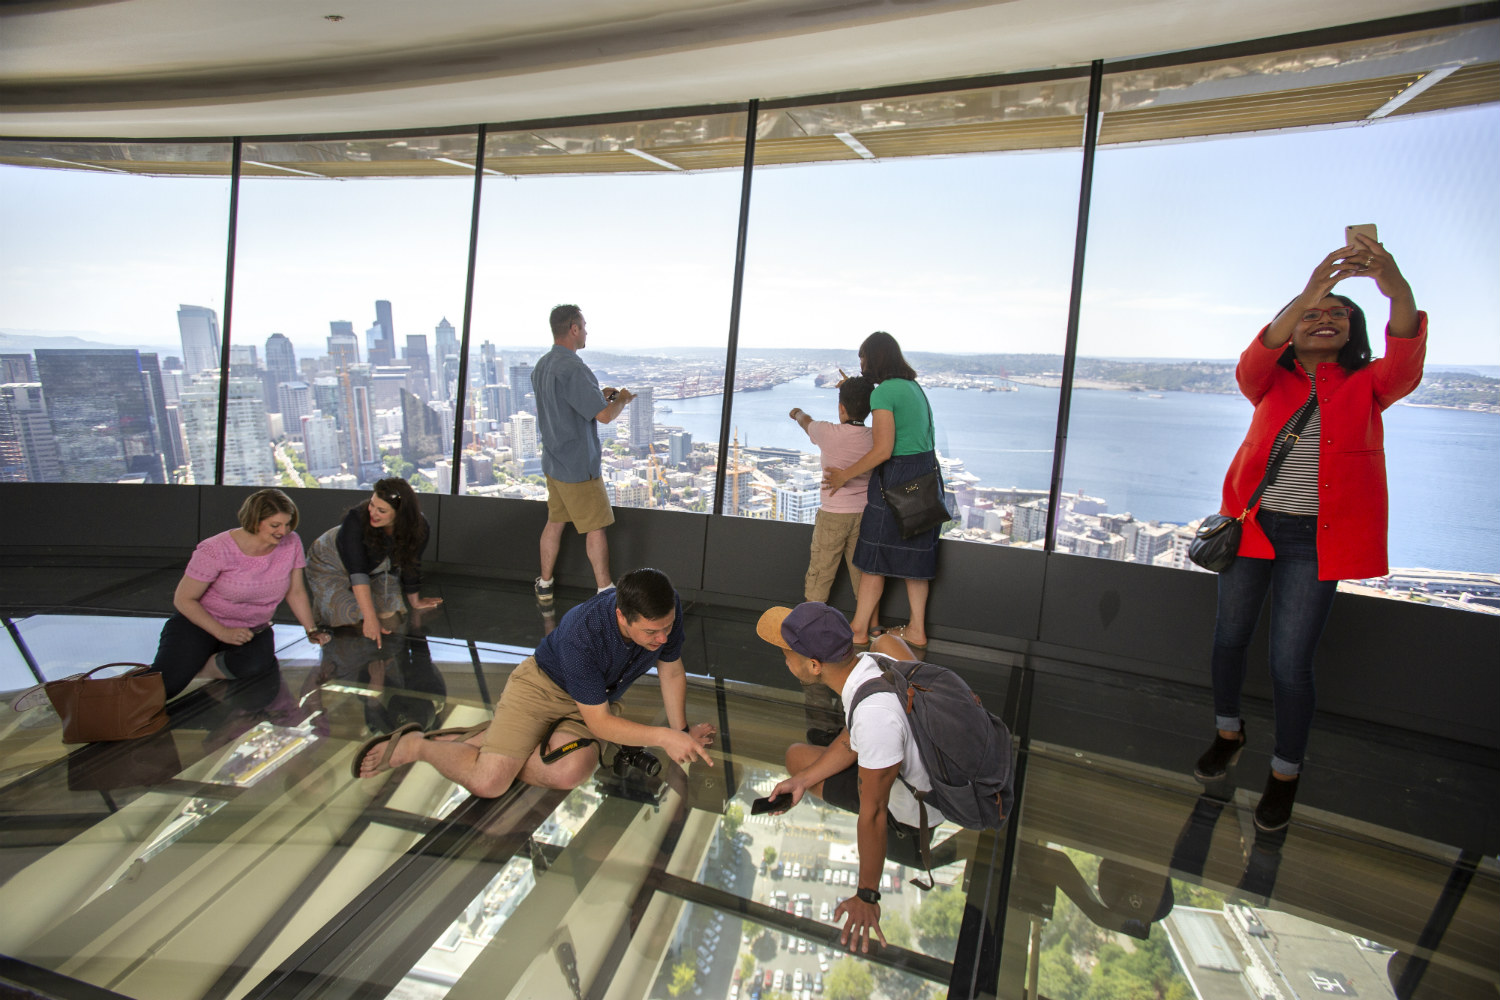 seattle space needle now has a revolving glass floor 2